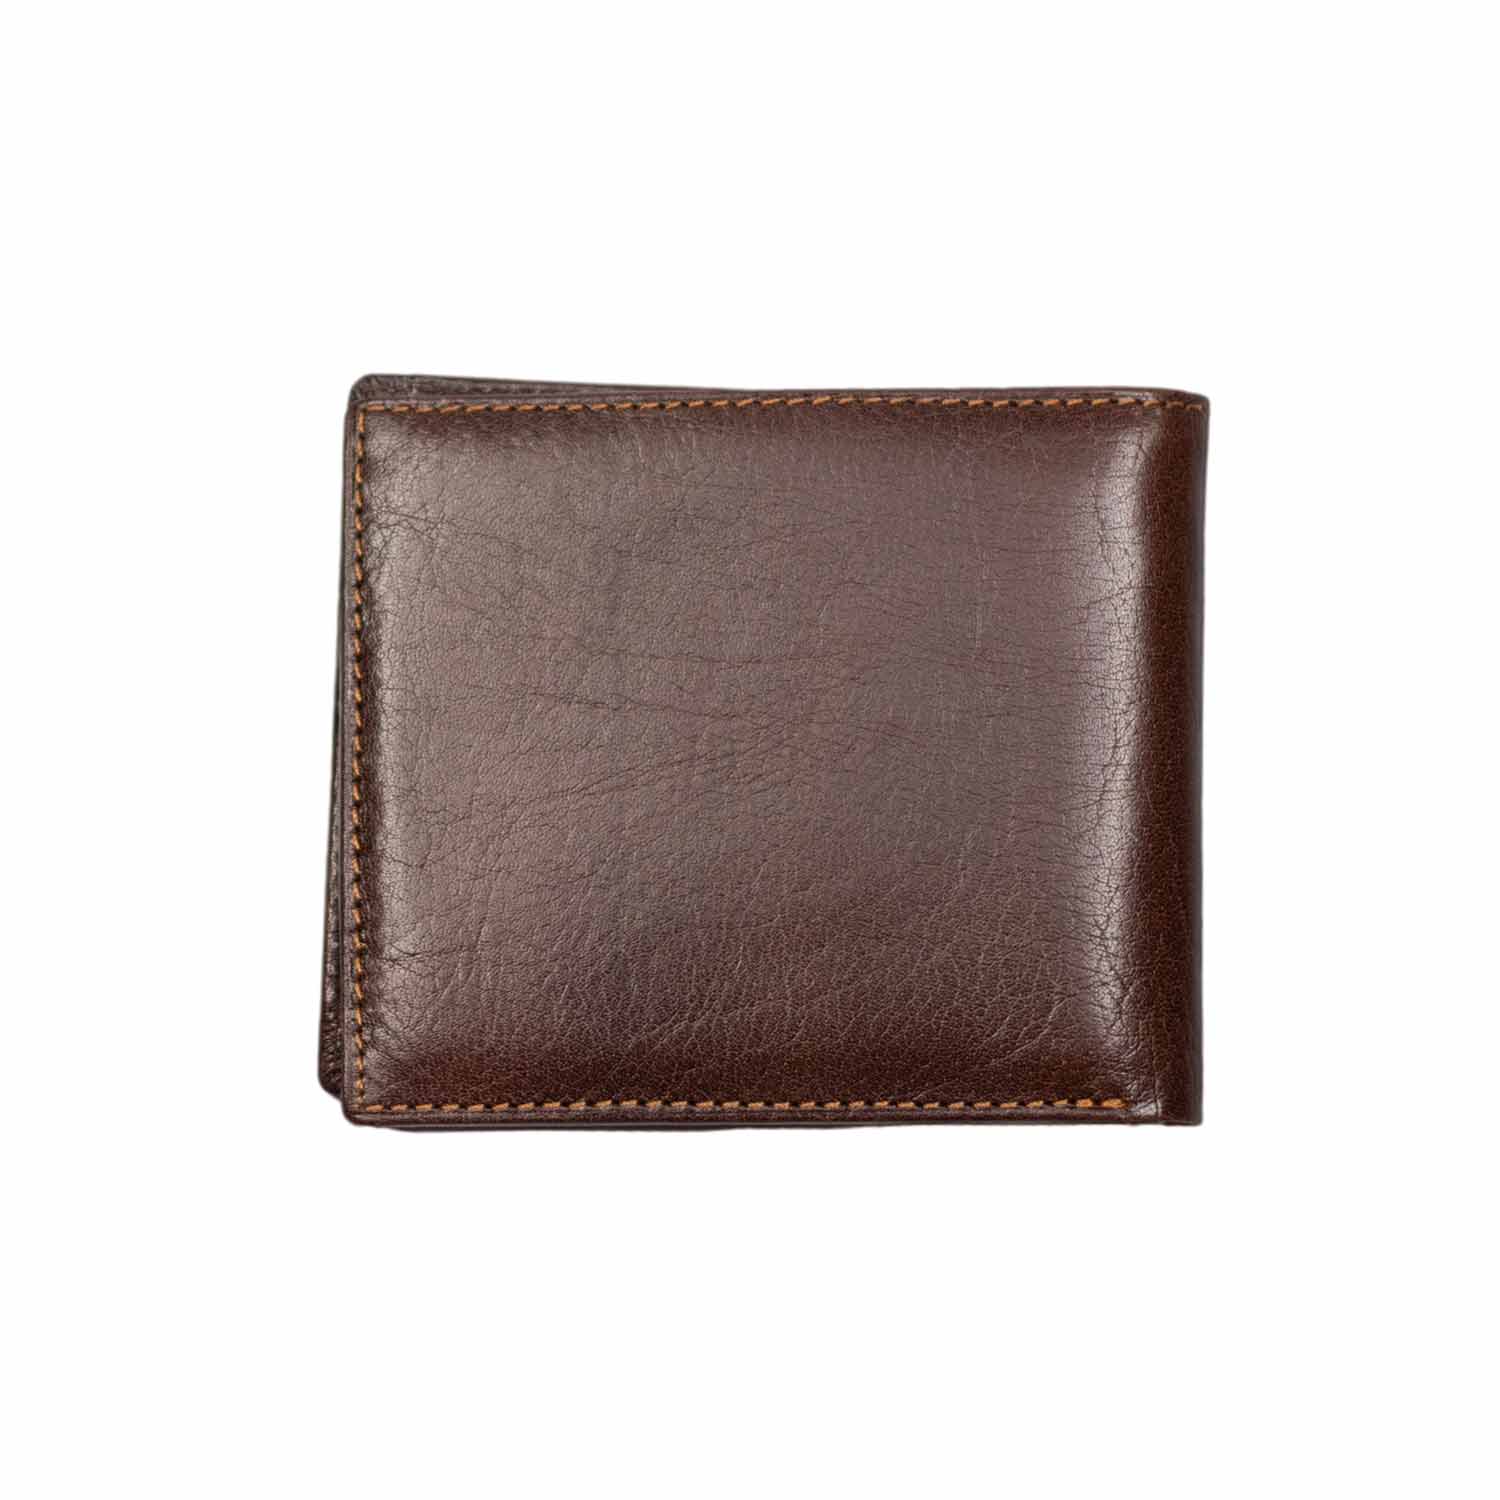 Essential Men's Wallet | Leather Wallets | MABU Leathers